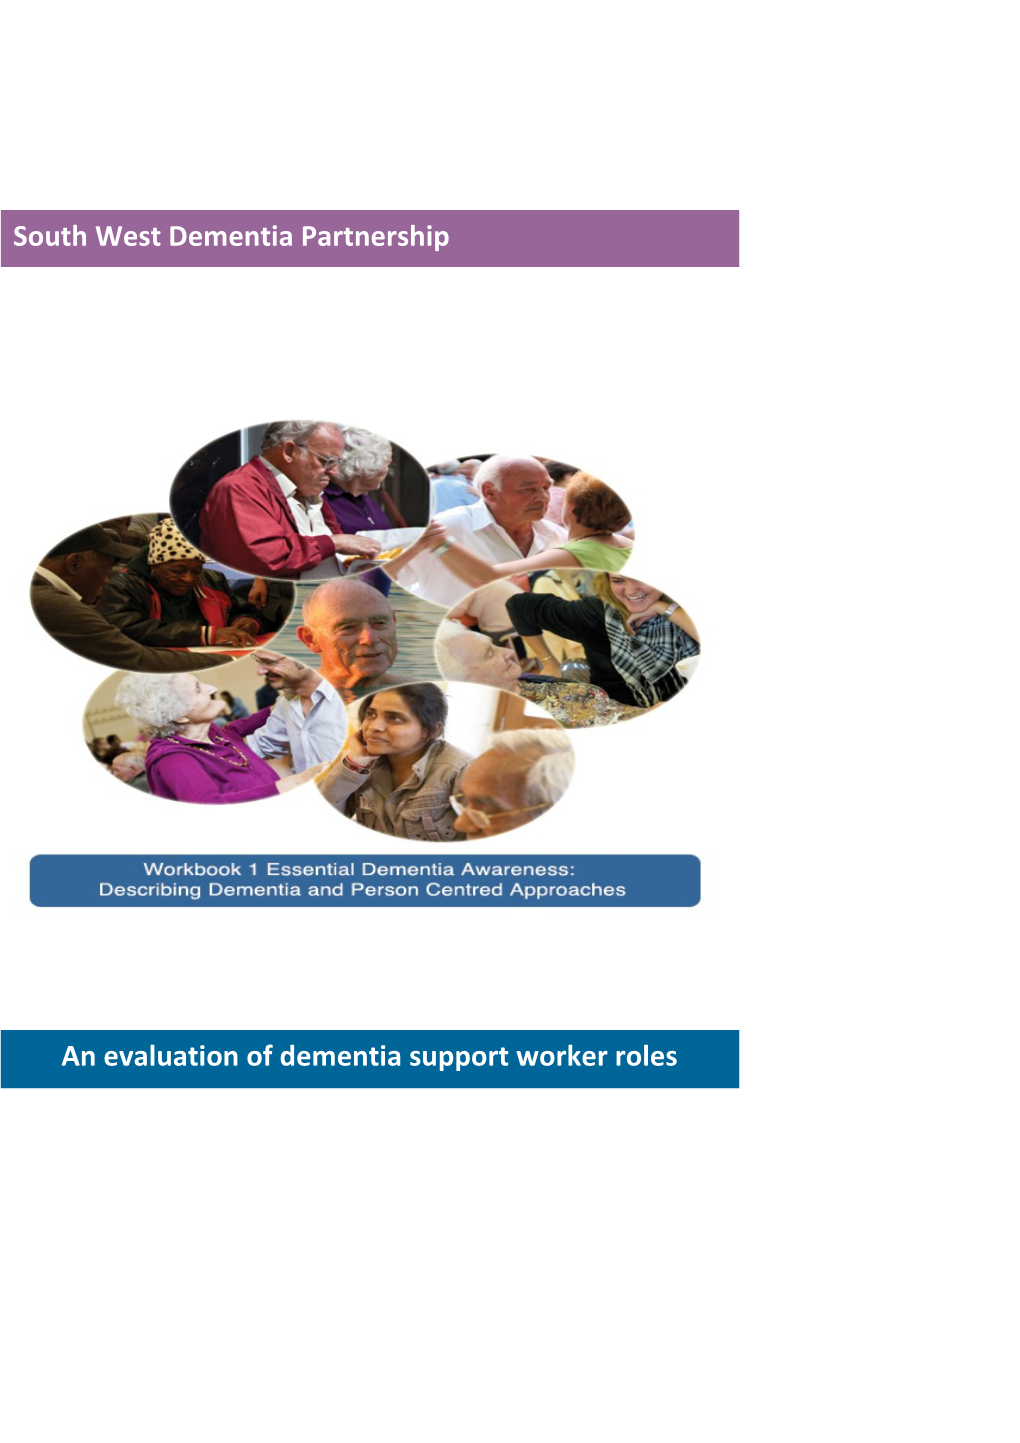 An Evaluation of Dementia Support Worker Roles